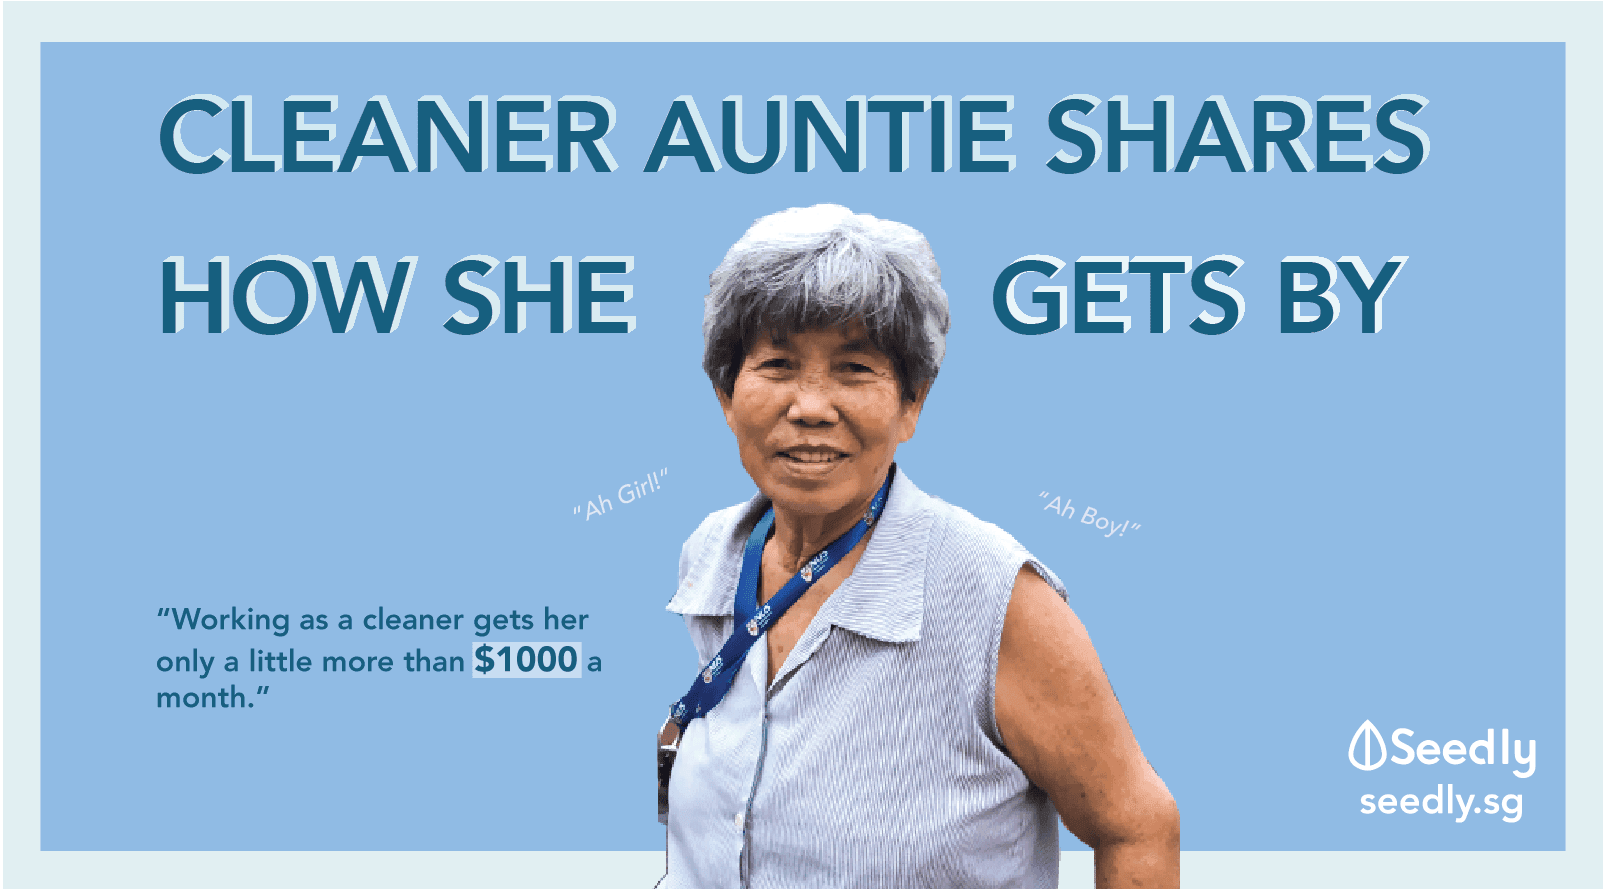 Cleaner Auntie in Singapore. How much they earn?